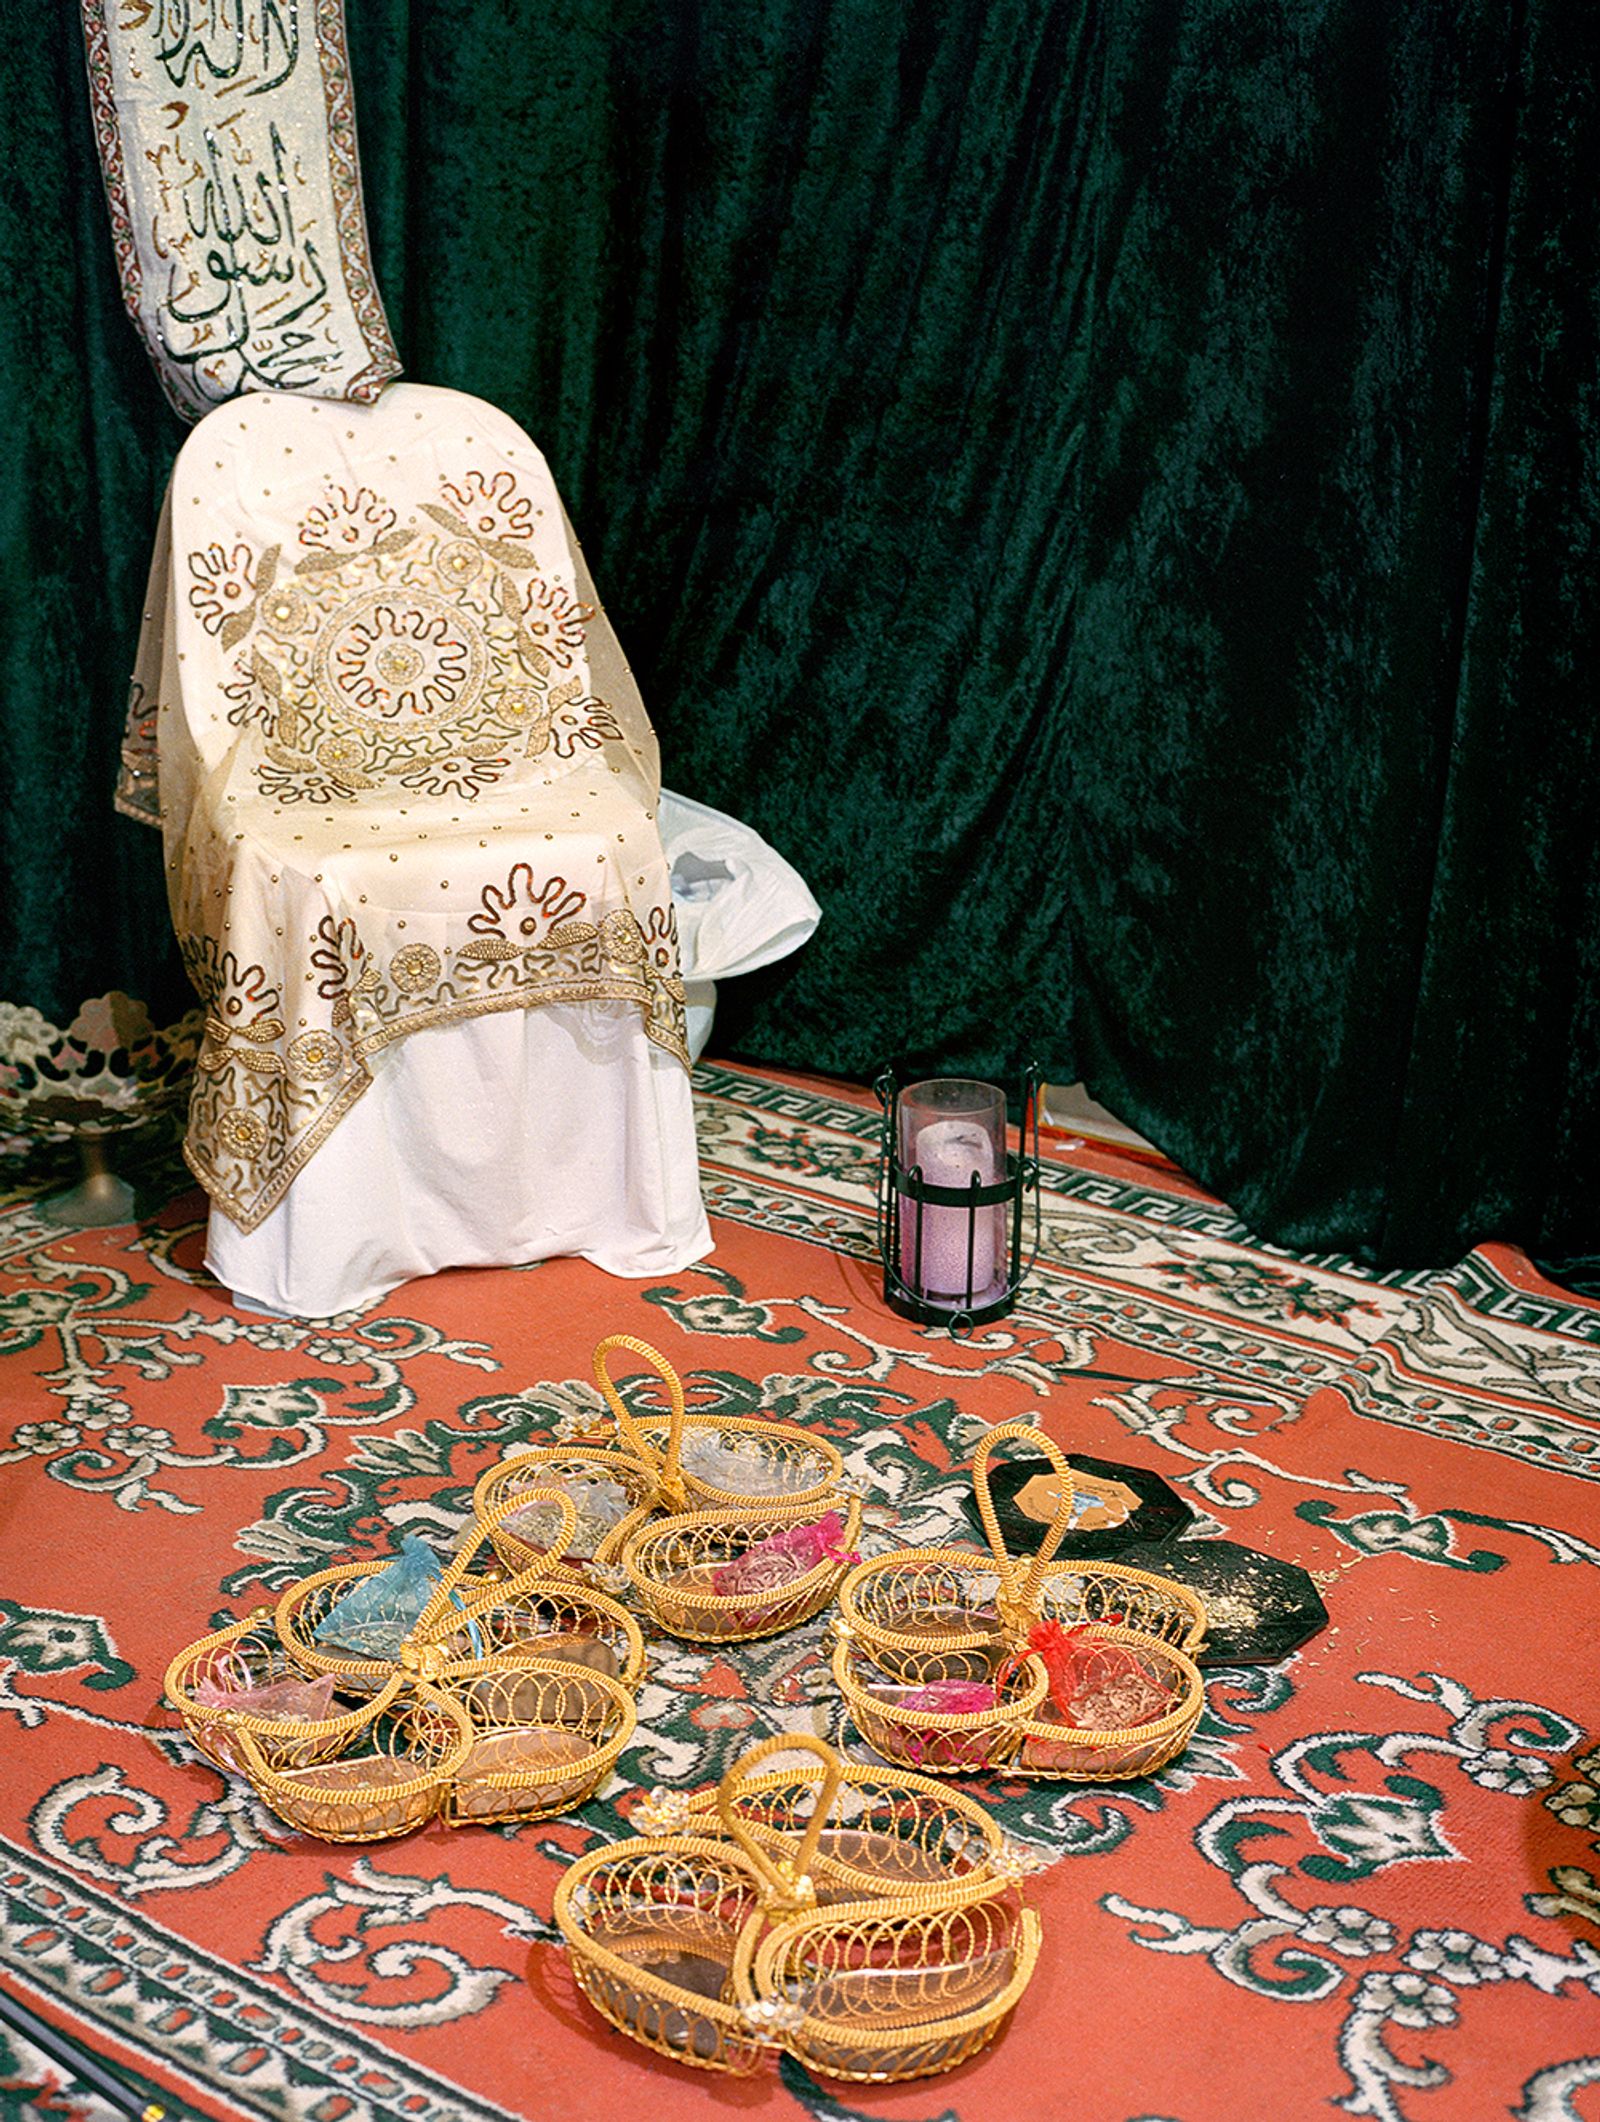 © Ayesha Kazim - Image from the This Home of Ours photography project